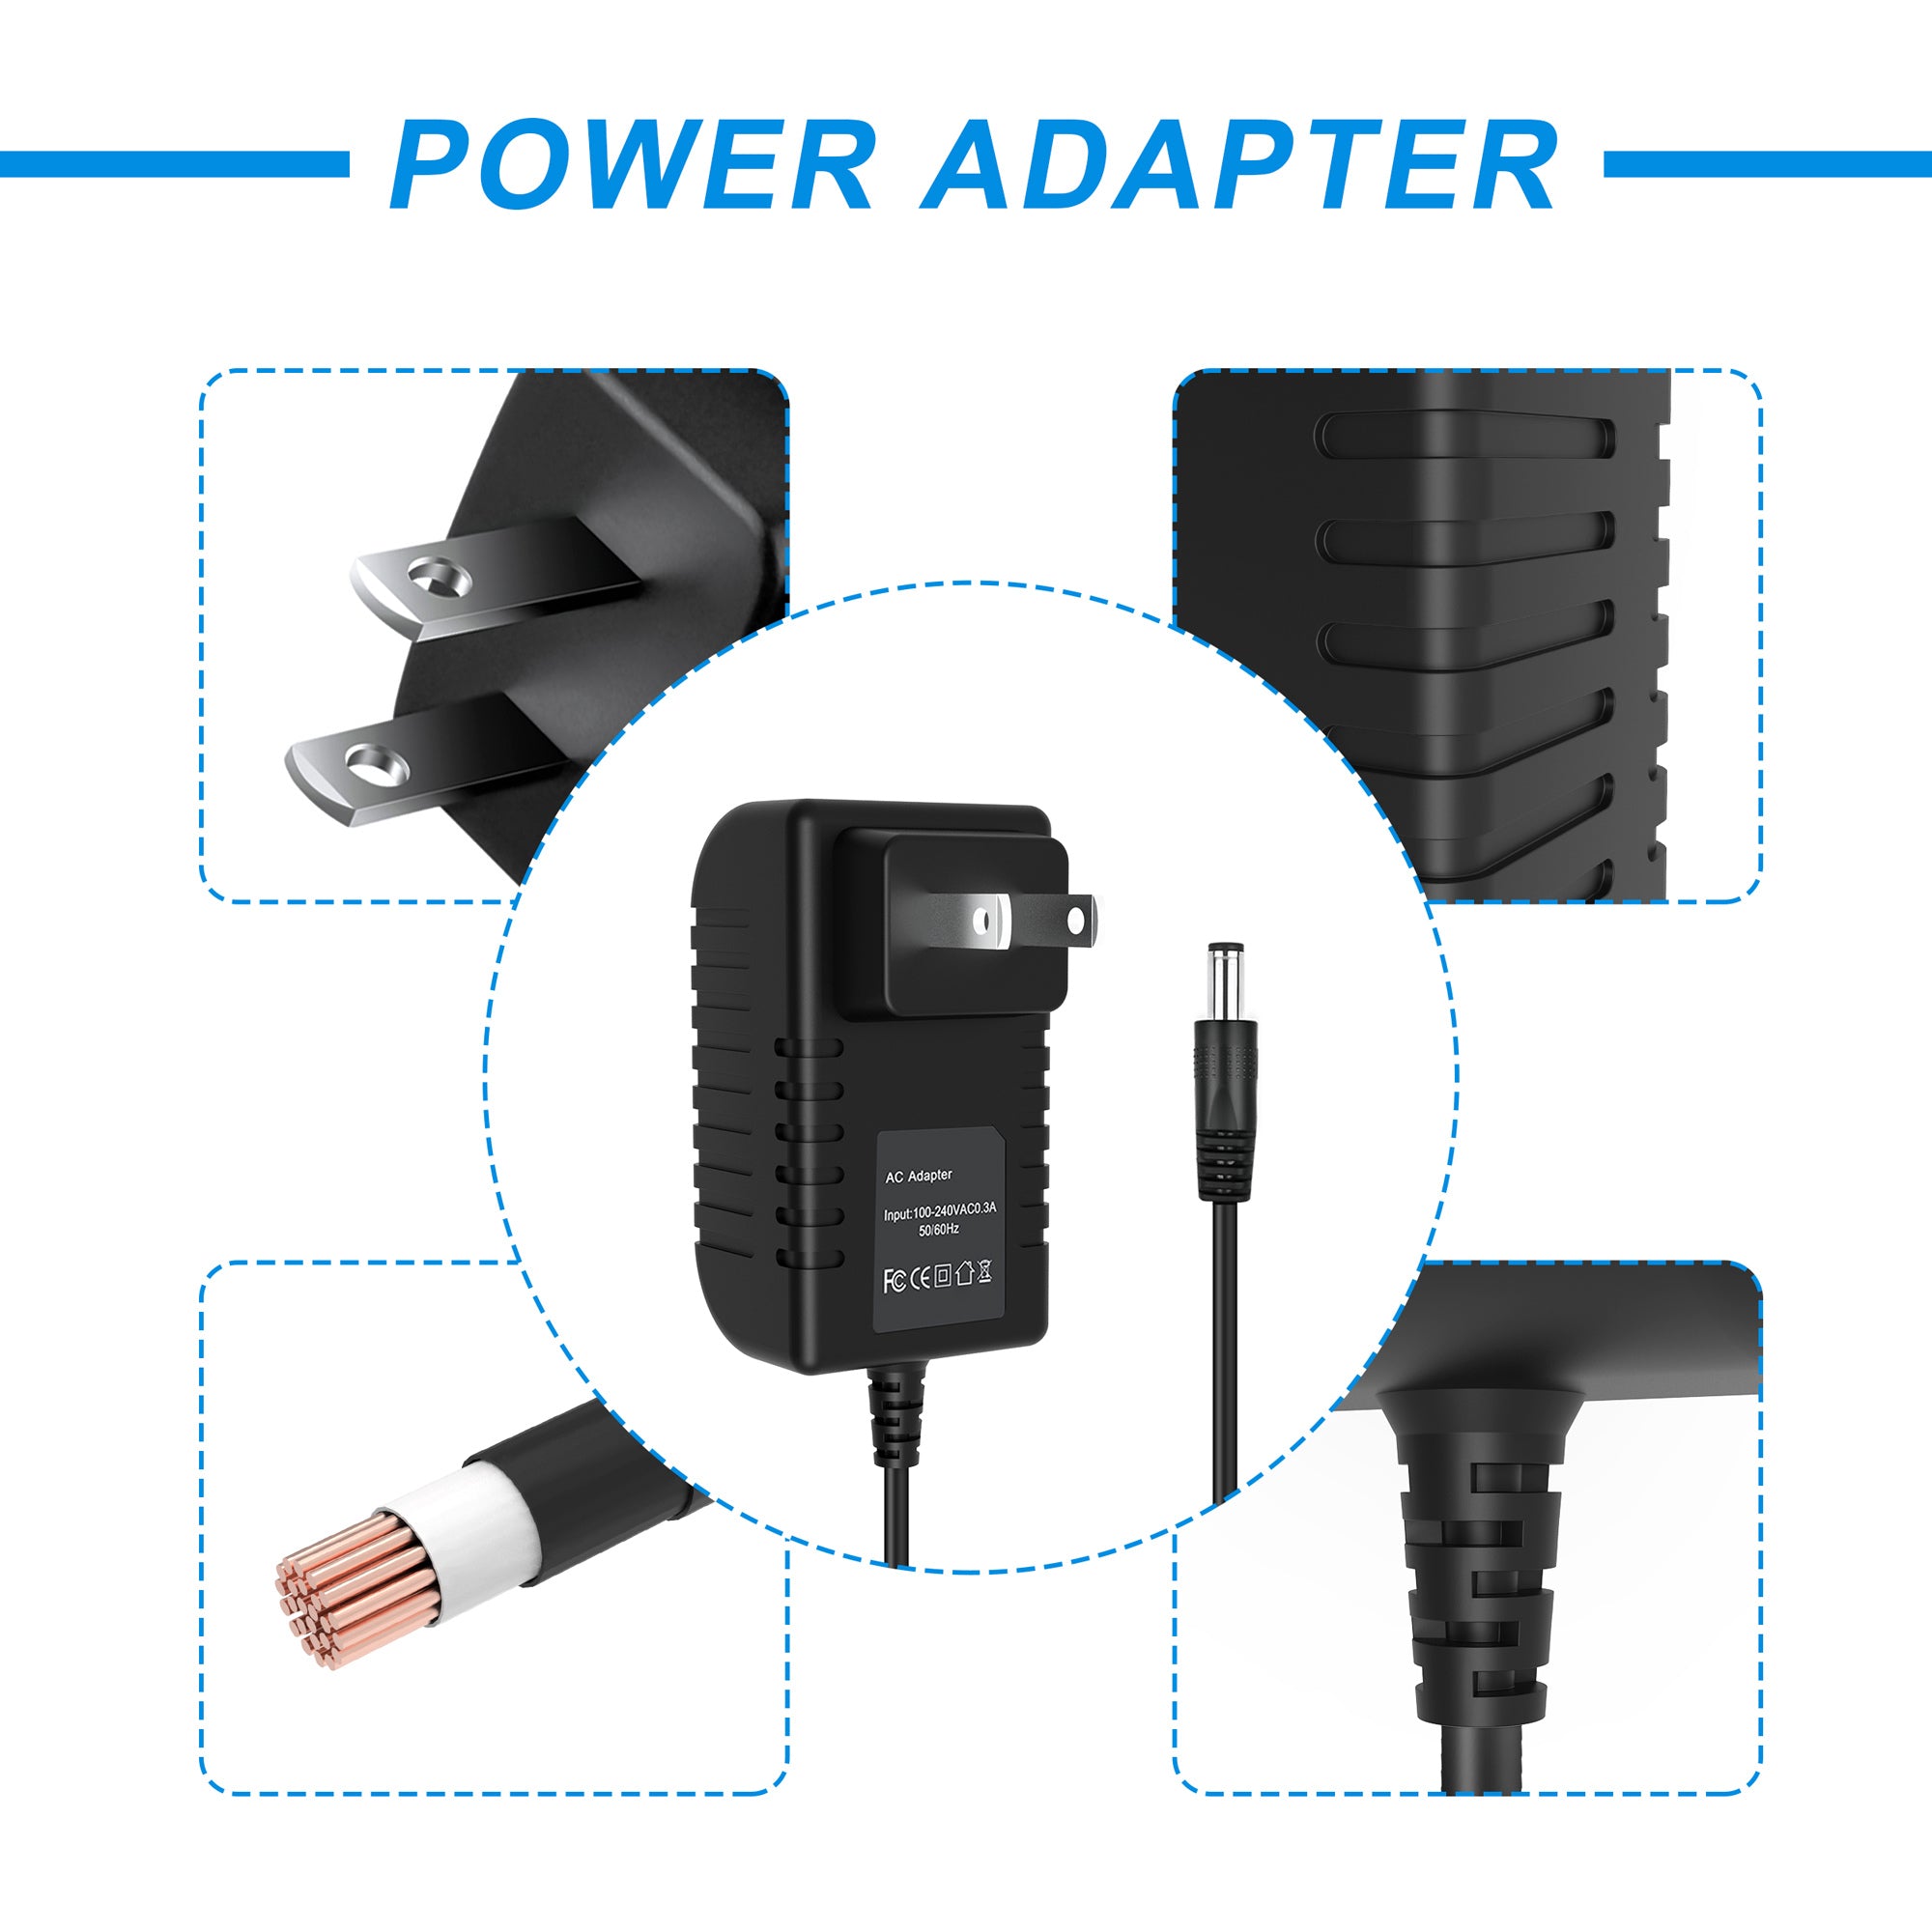 AbleGrid 6V AC/DC Adapter Compatible with Jensen MR-A1 MRA1 6VDC Class Power Supply Cord Cable Charger Input: 100V - 120V AC - 240 VAC 50/60Hz Worldwide Voltage Use Mains PSU